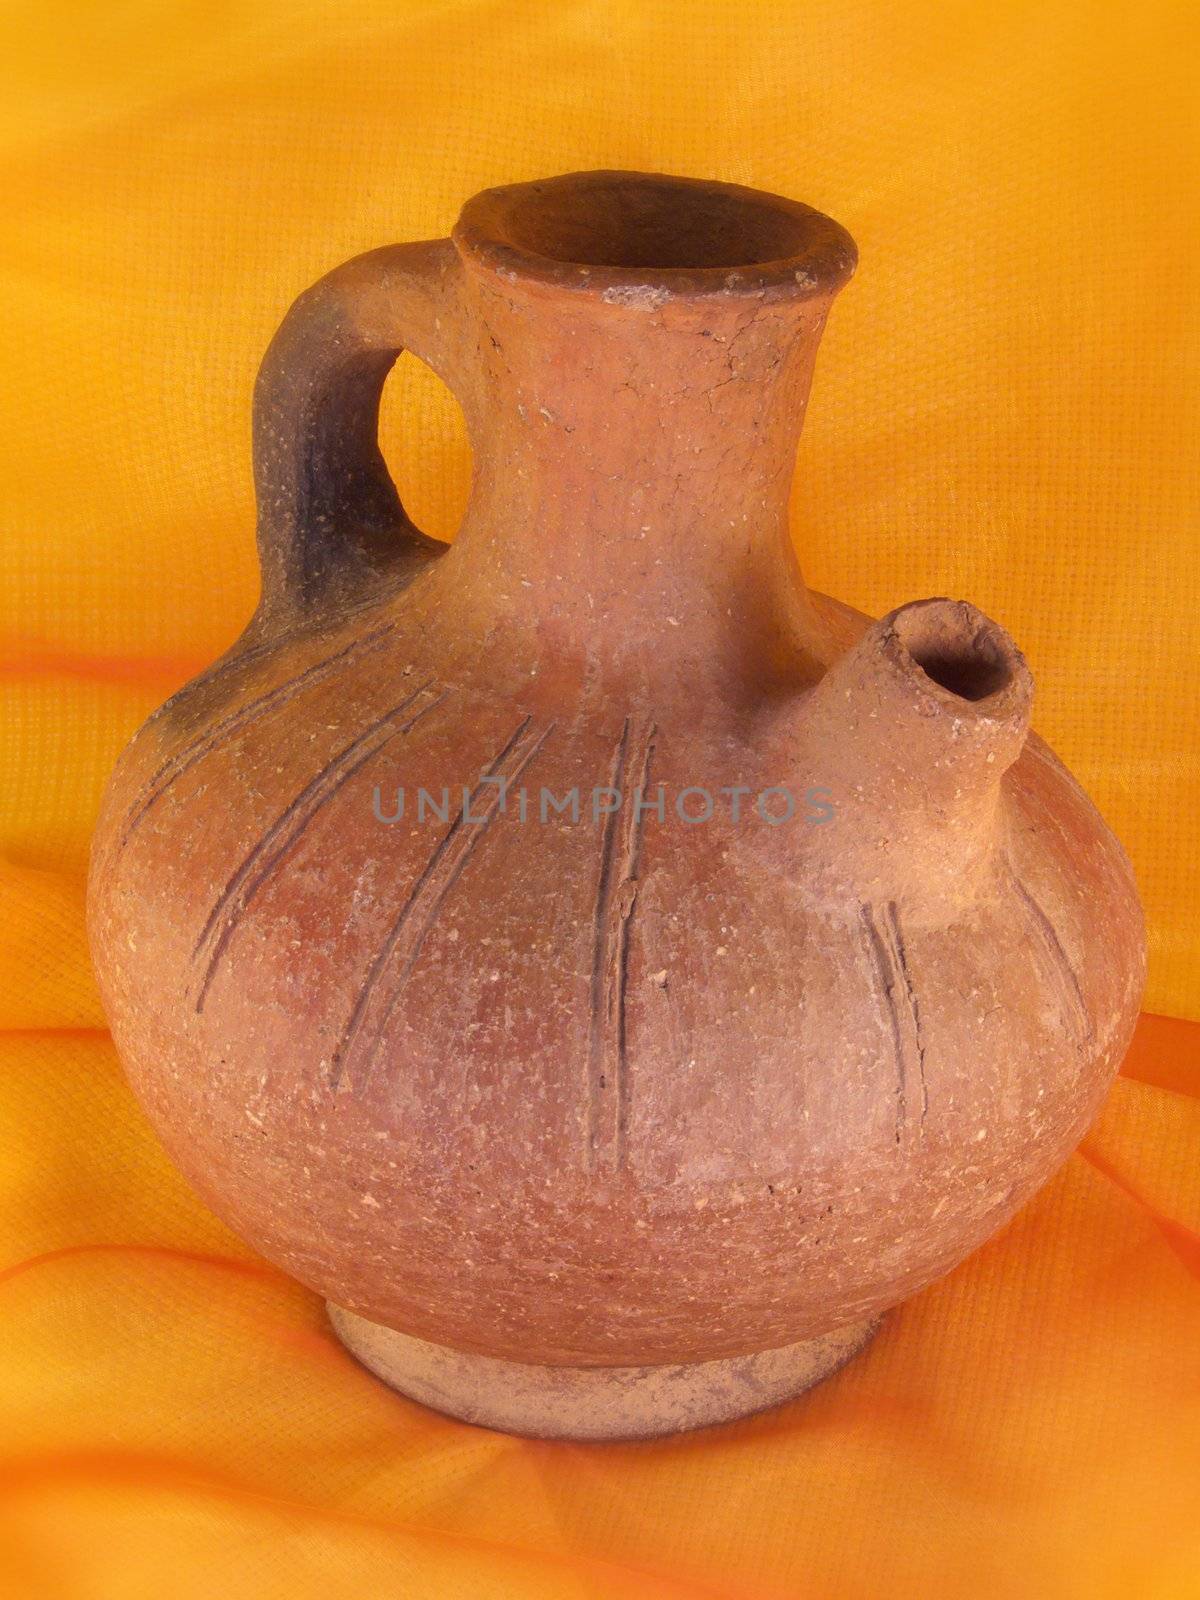 digital image of an Africa, pottery jug